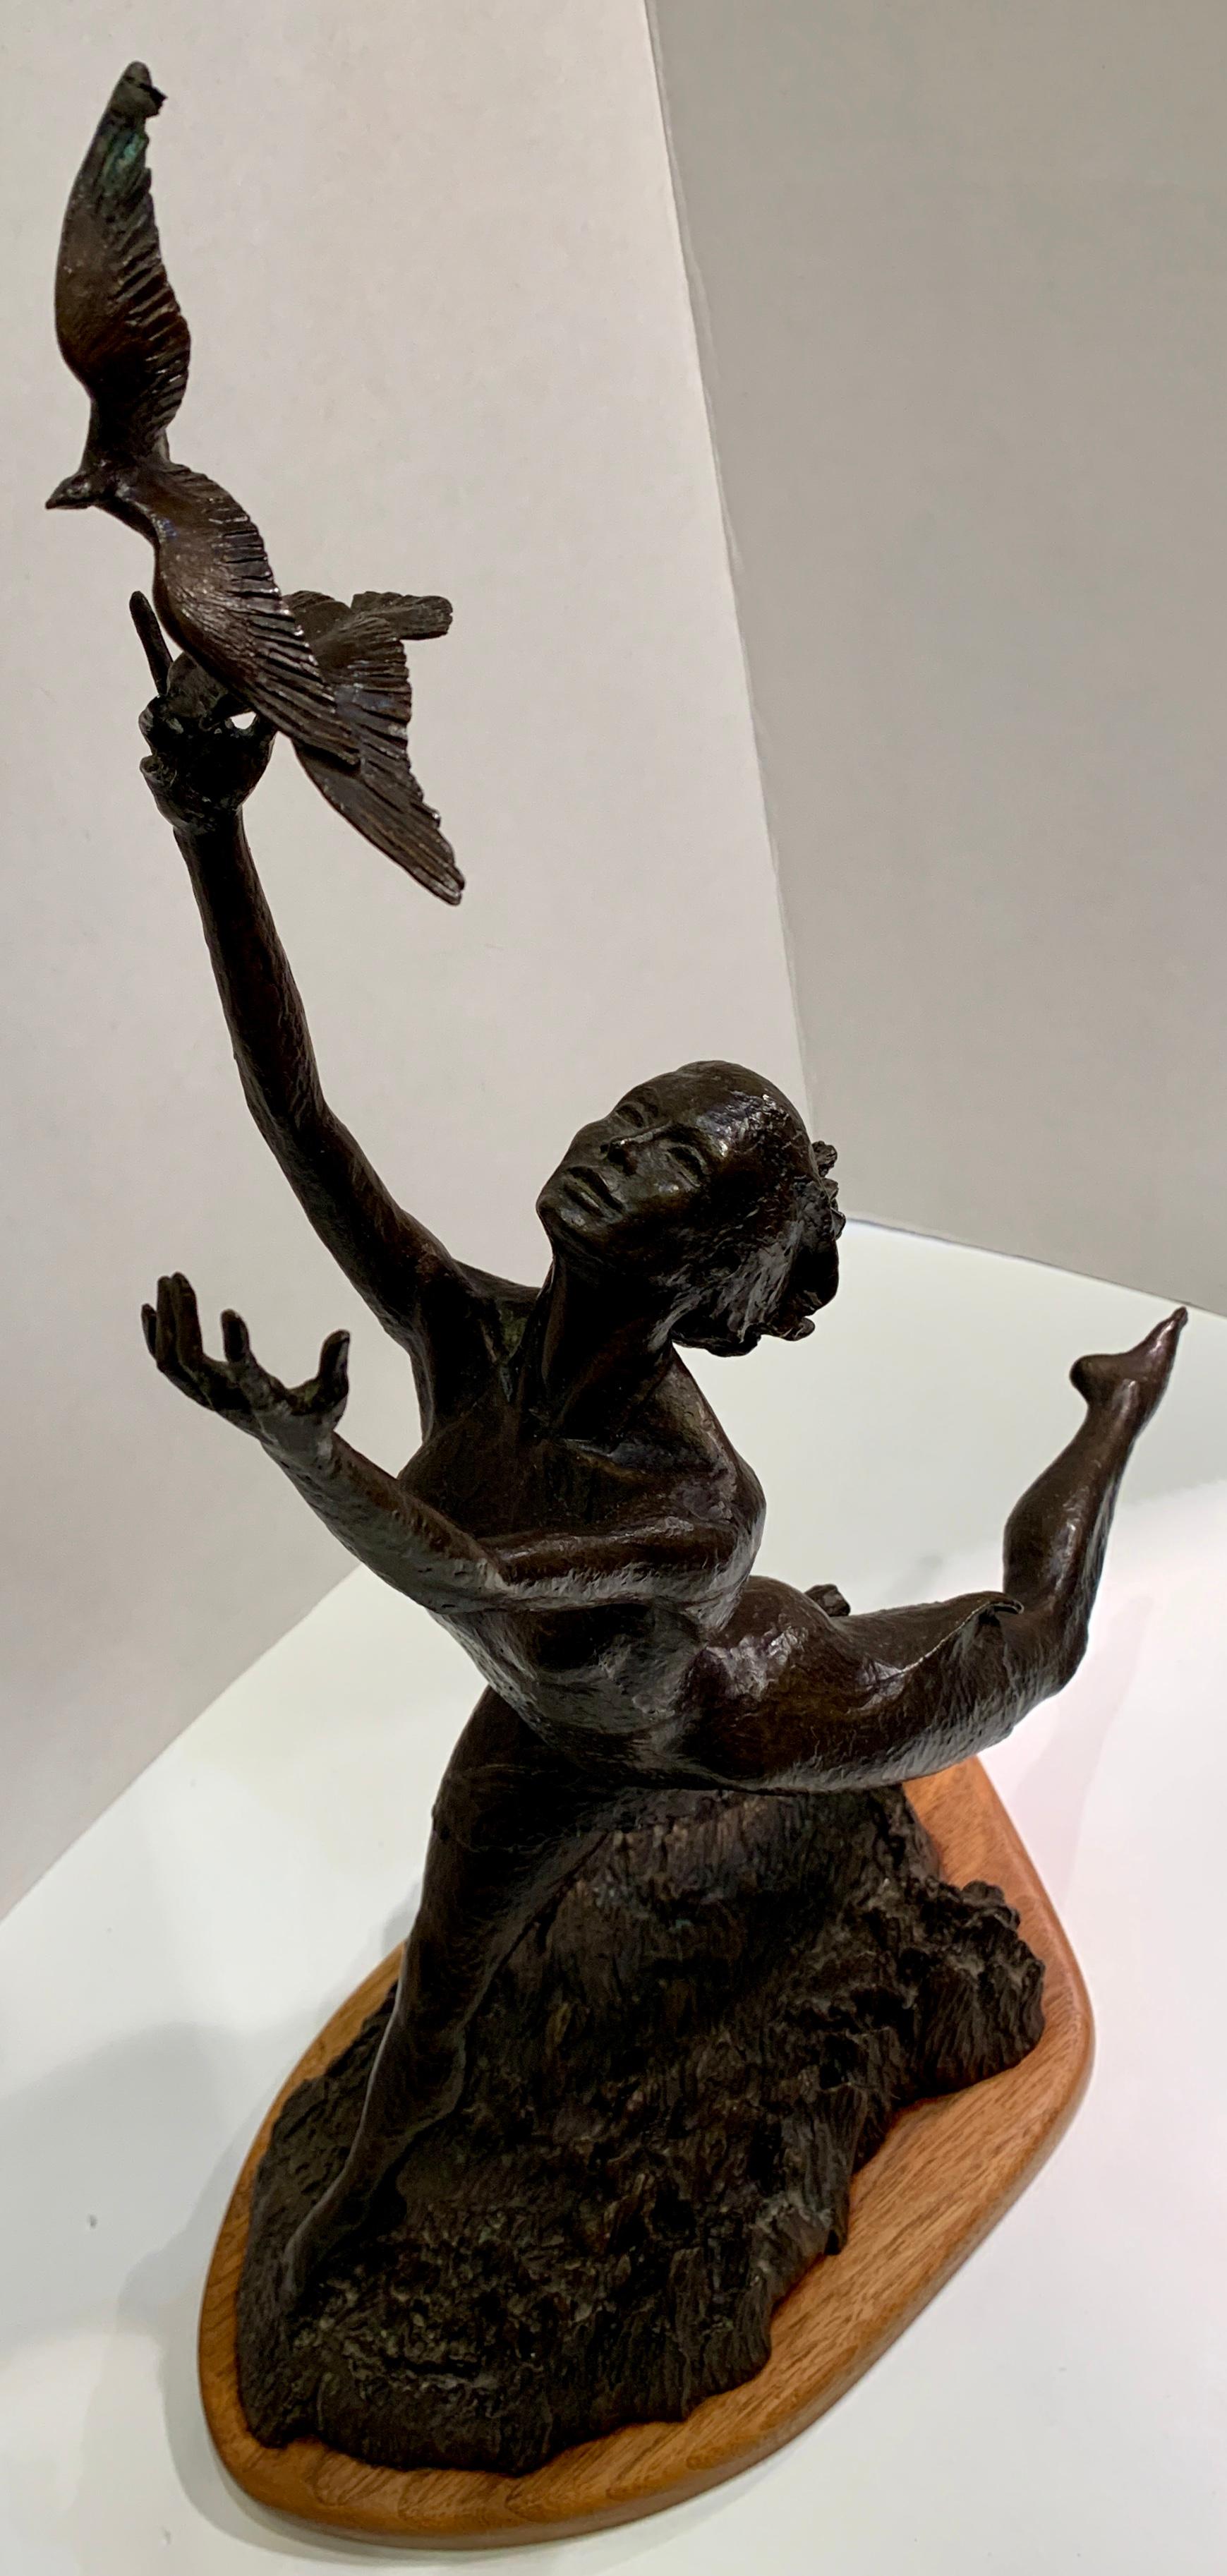 Late 20th Century Art Deco Style Bronze Sculpture of a Woman Reaching for Seagulls by M. Young